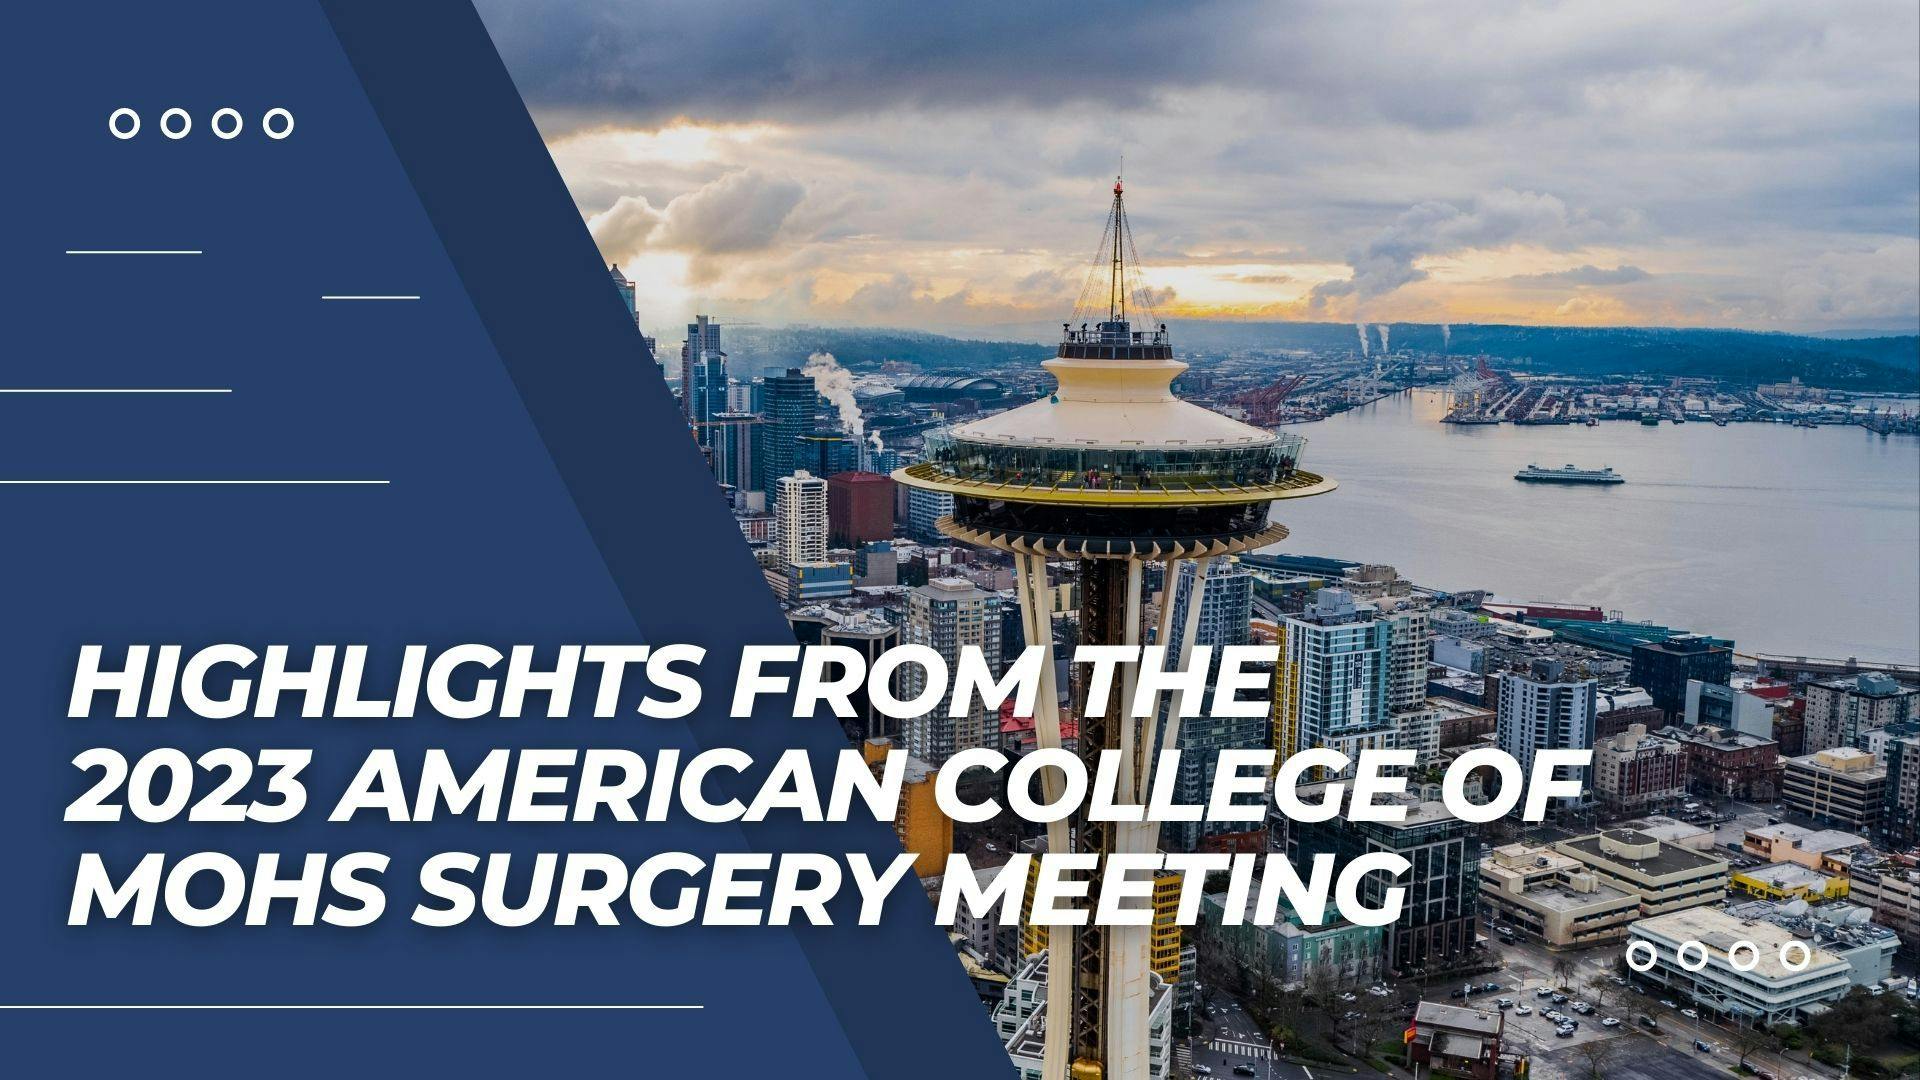 SLIDESHOW: Highlights from the 2023 American College of Mohs Surgery Meeting